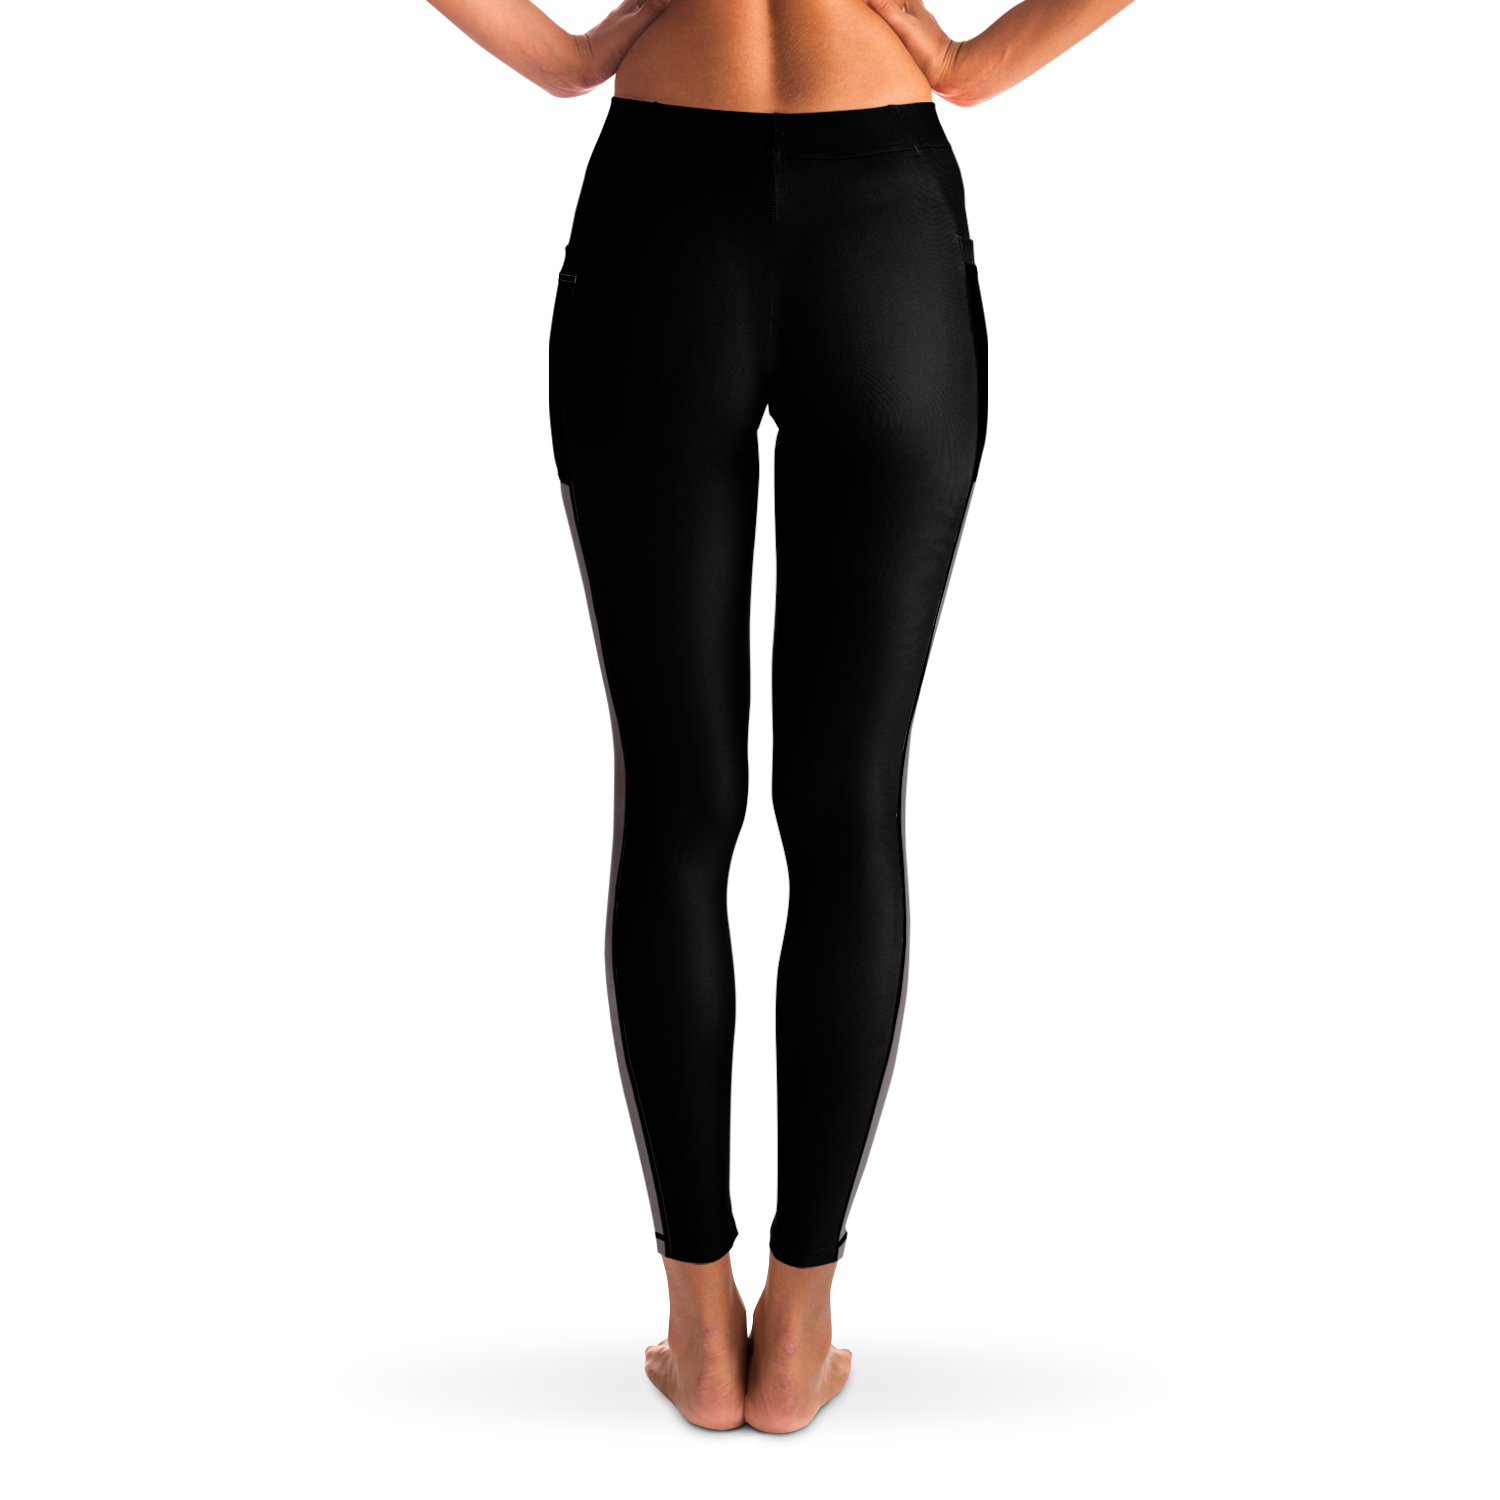 WRWC Everyday Glow Aura ~ 2022 Mesh Pocket Leggings - Who R We Collective